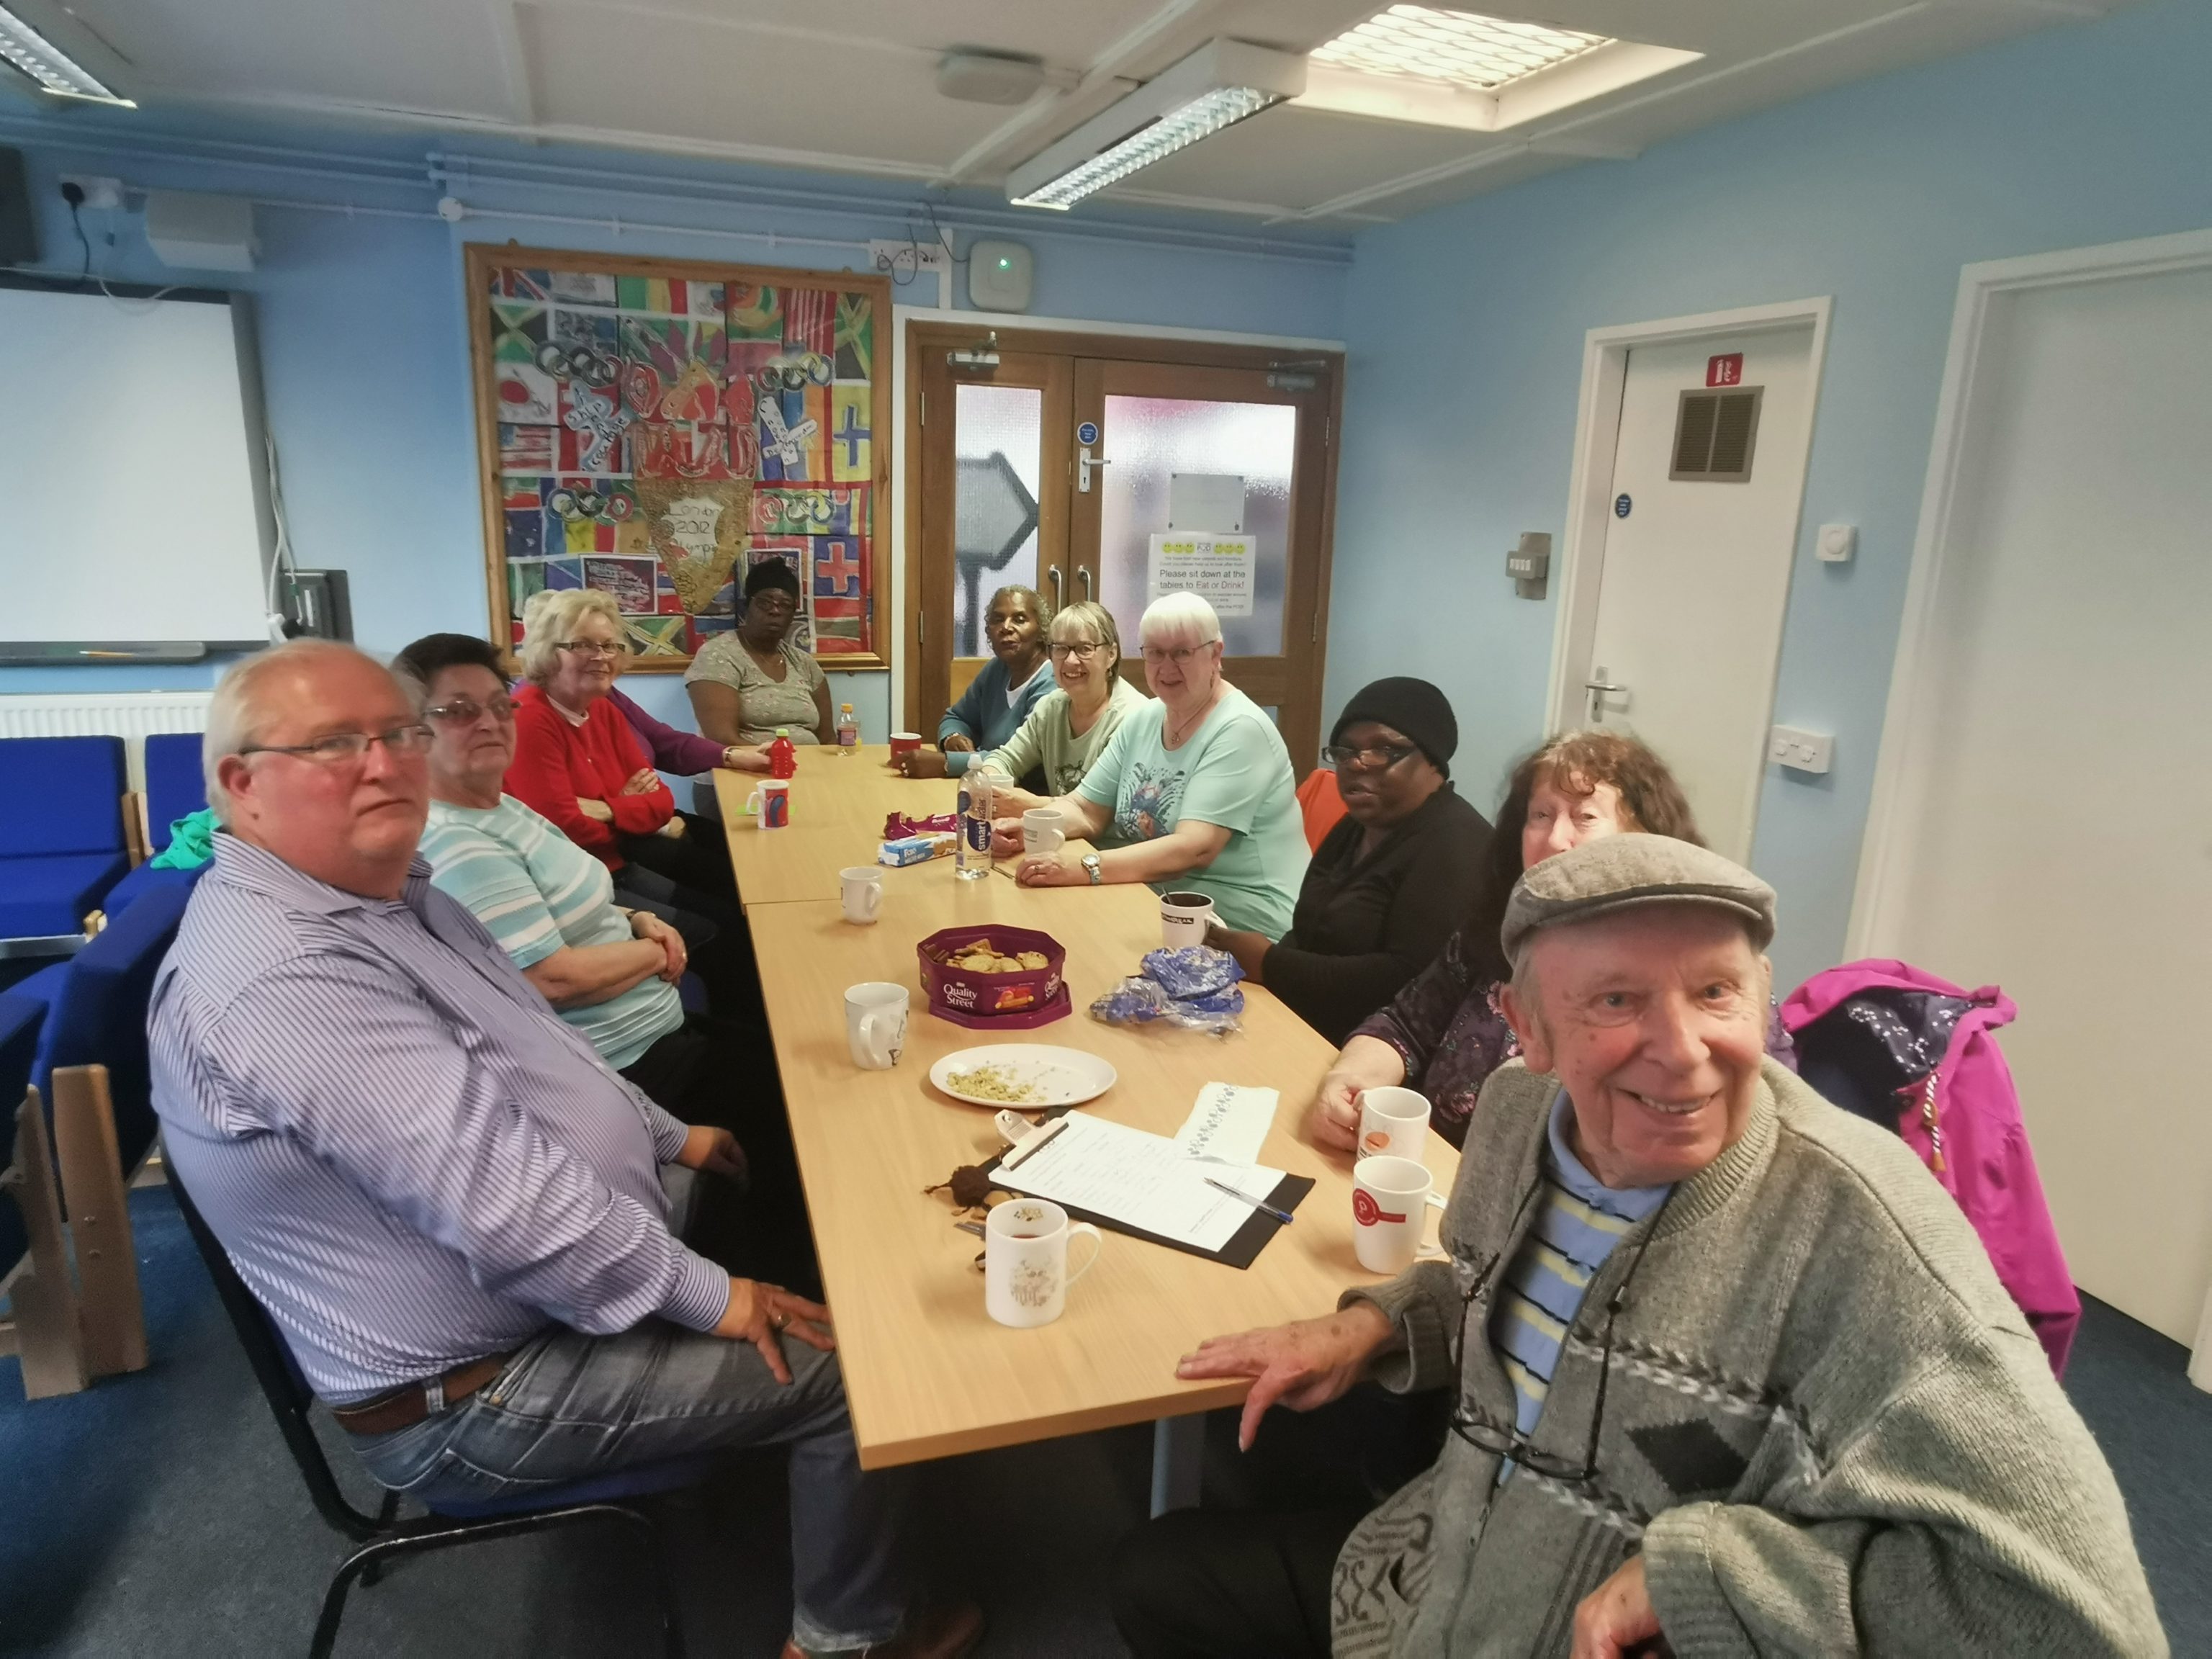 As everyone knows, supporting the local community is at the heart of McDermotts. For the last three years, every Wednesday afternoon a member of staff from Head Office spends an hour with members of the POD – the local community centre for Nechells.